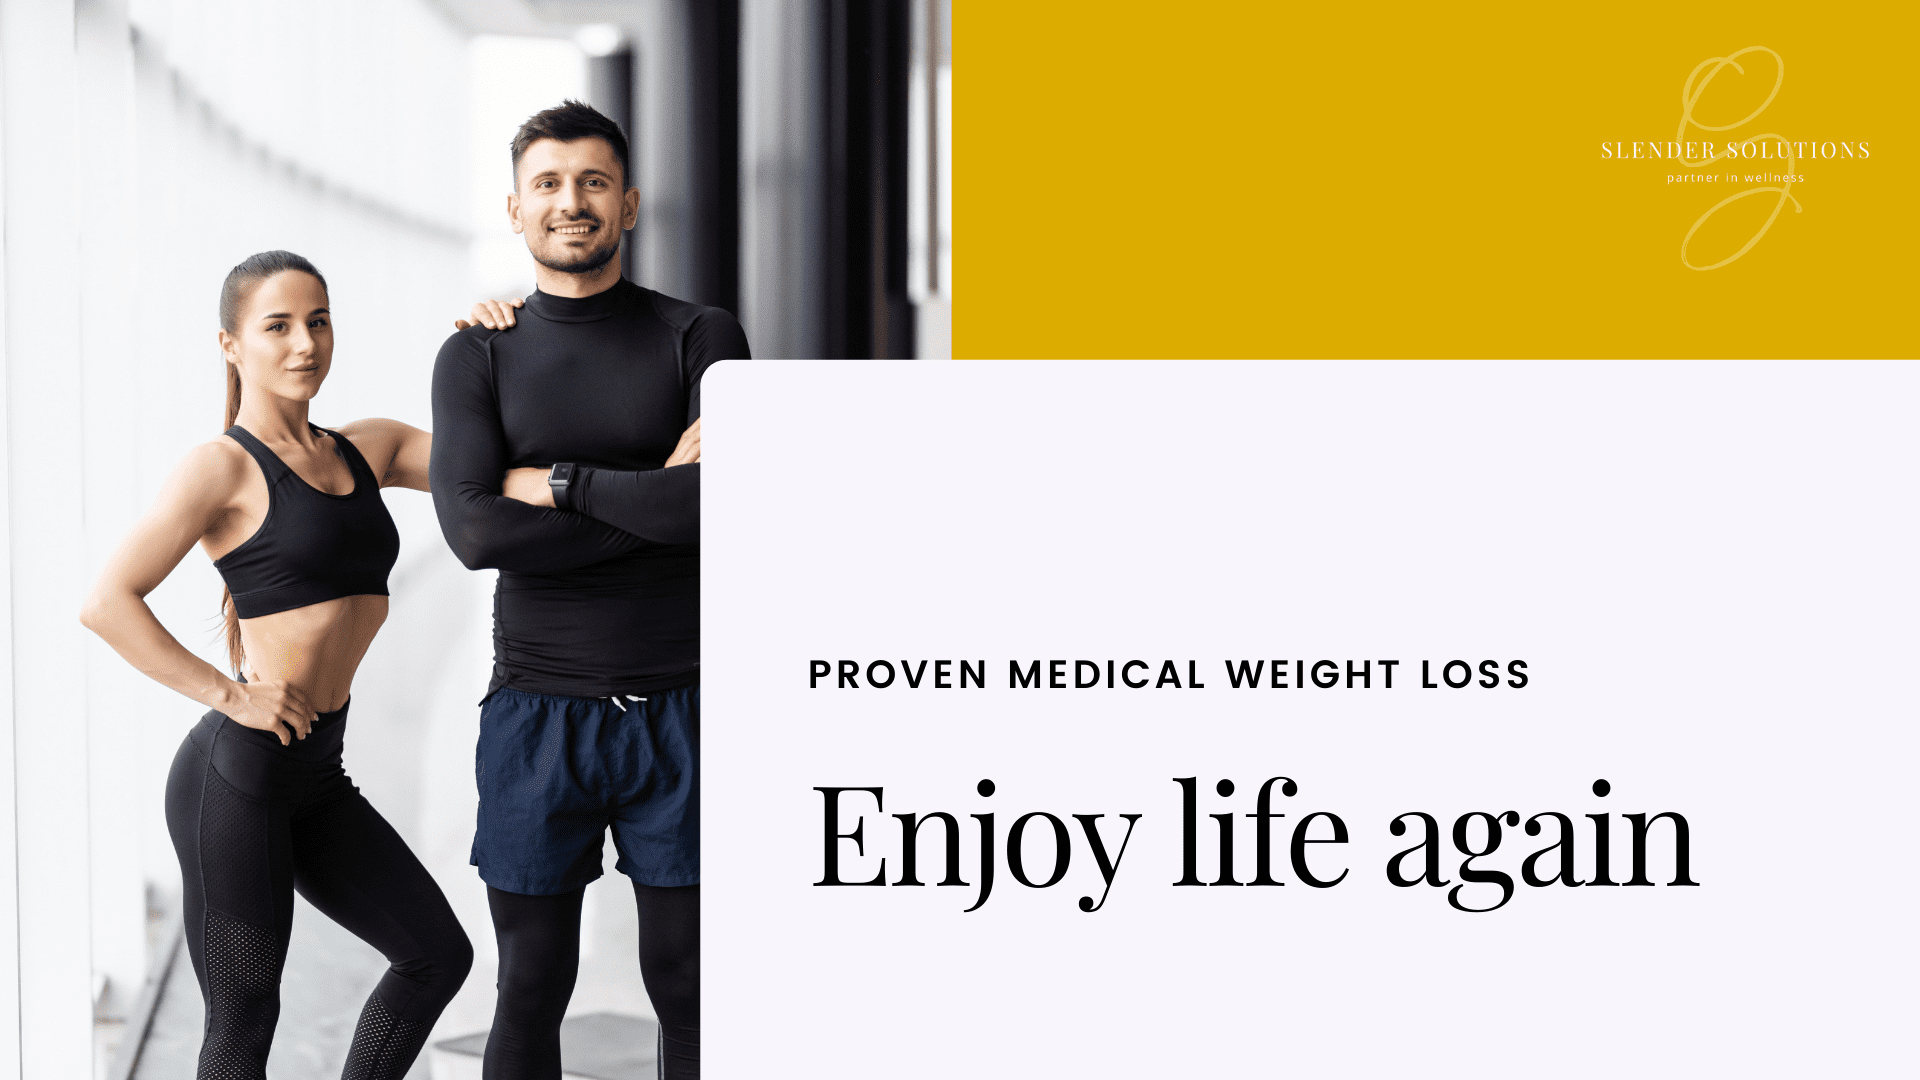 Medical Weight Loss Solutions in South Africa